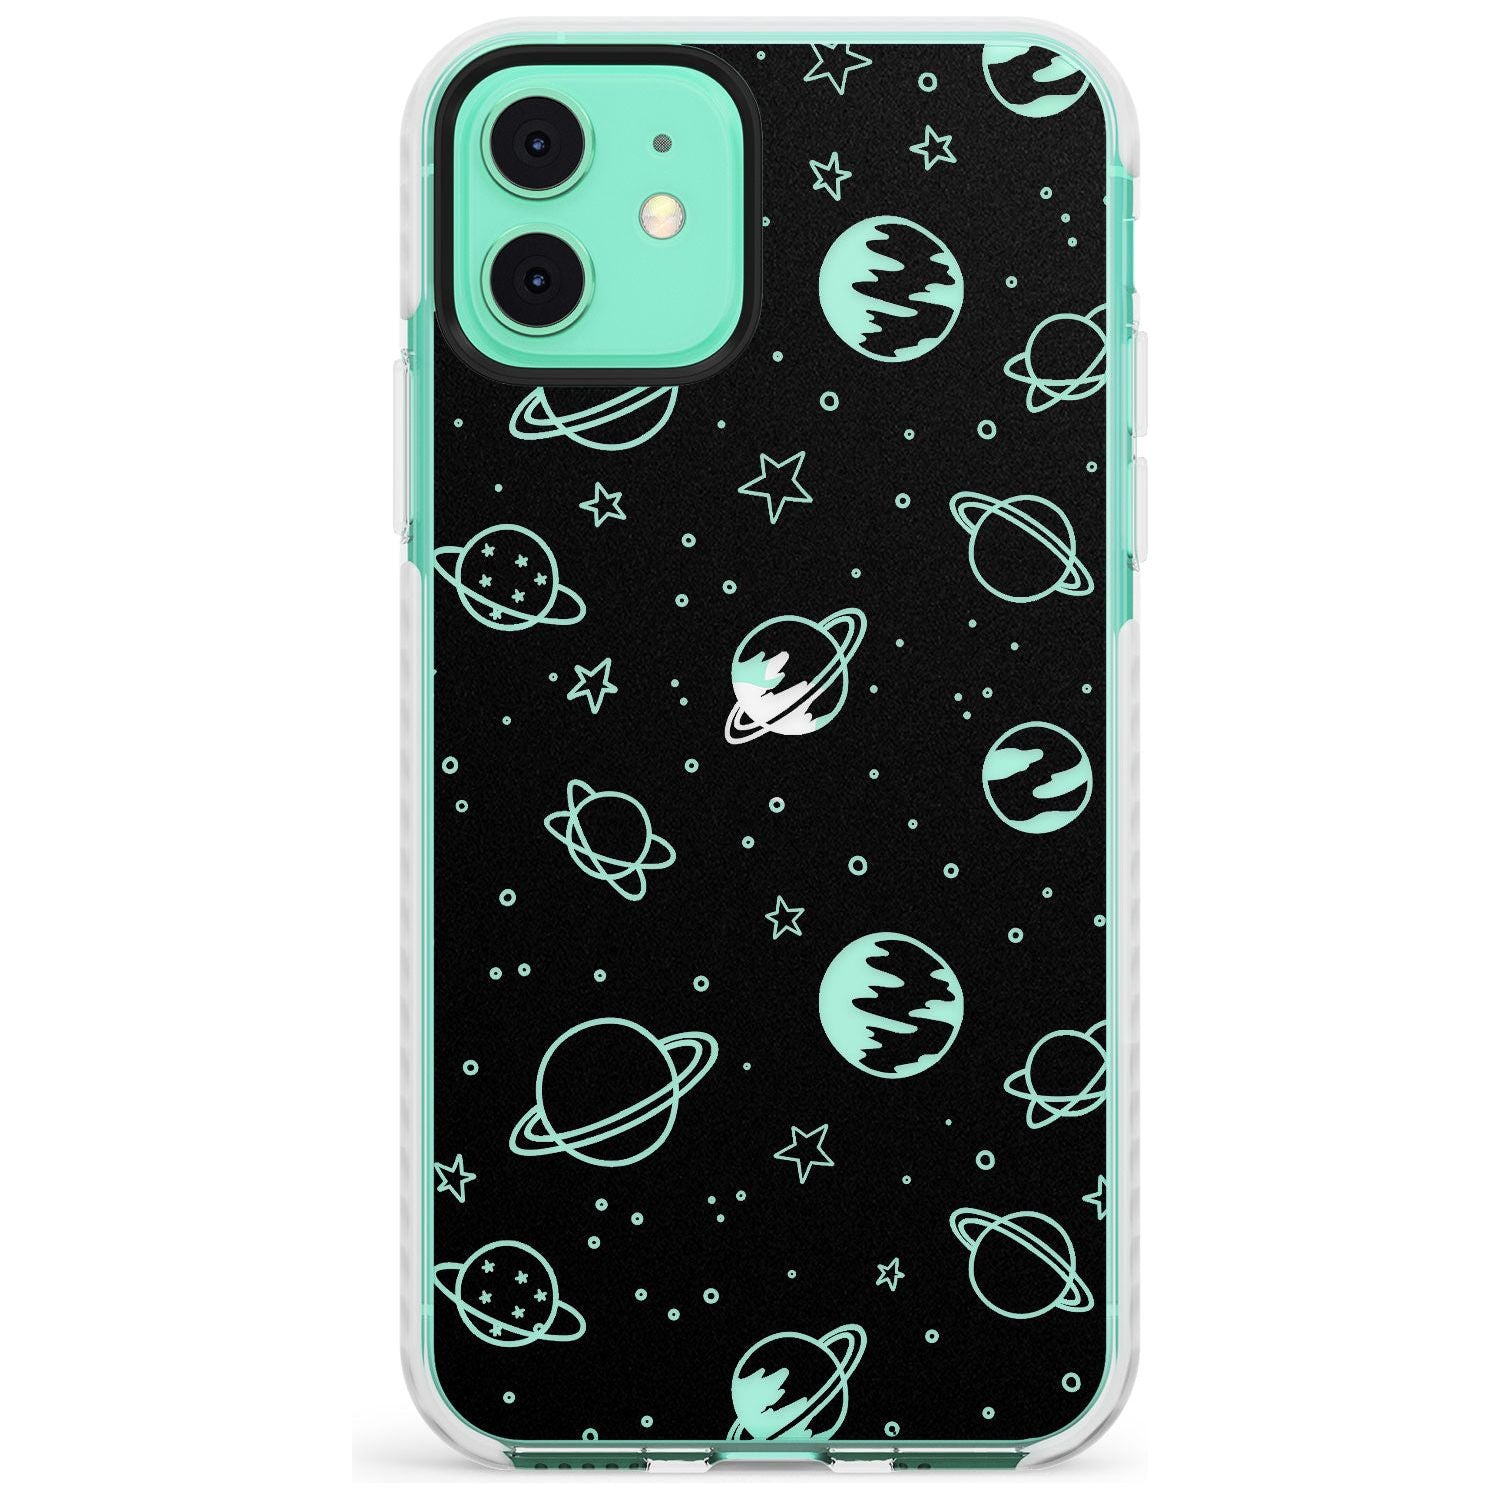 Outer Space Outlines: Clear on Black Slim TPU Phone Case for iPhone 11